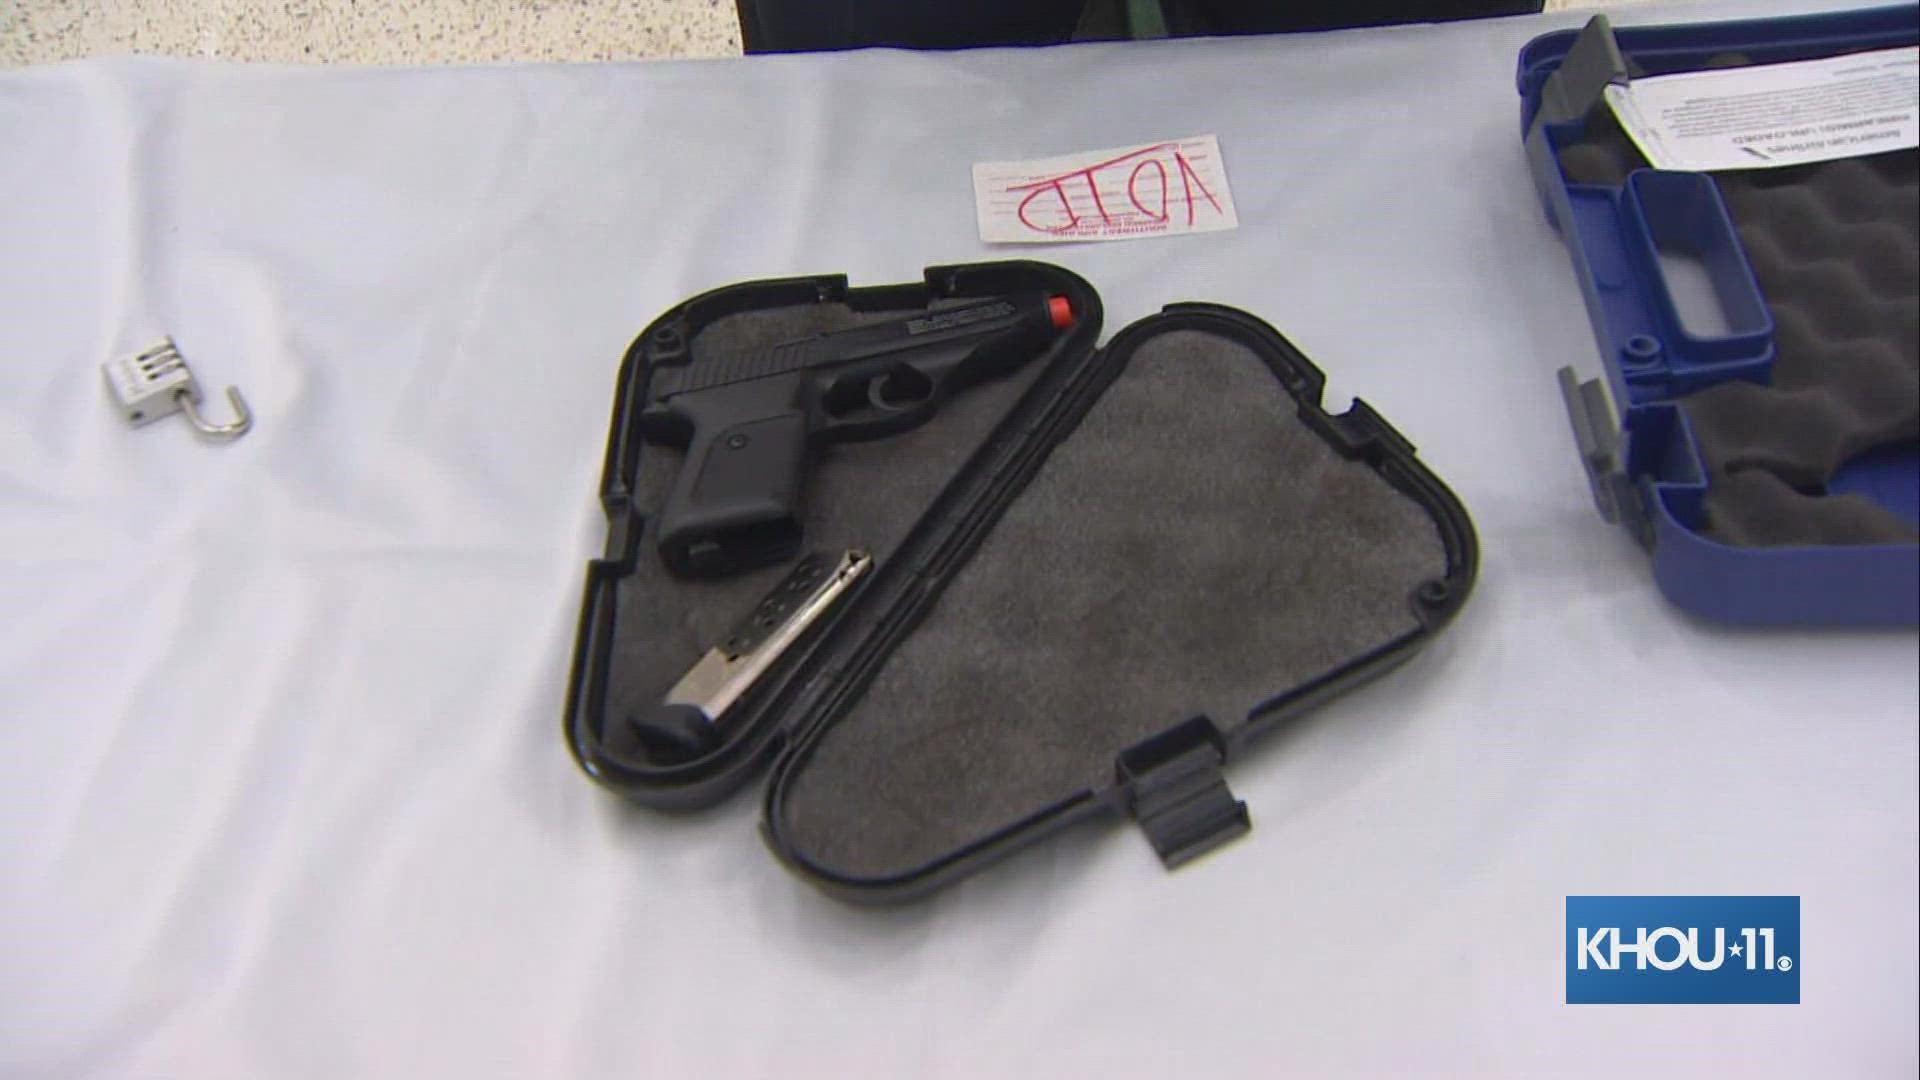 TSA demonstrated how to store a firearm in a checked bag for when you are traveling.